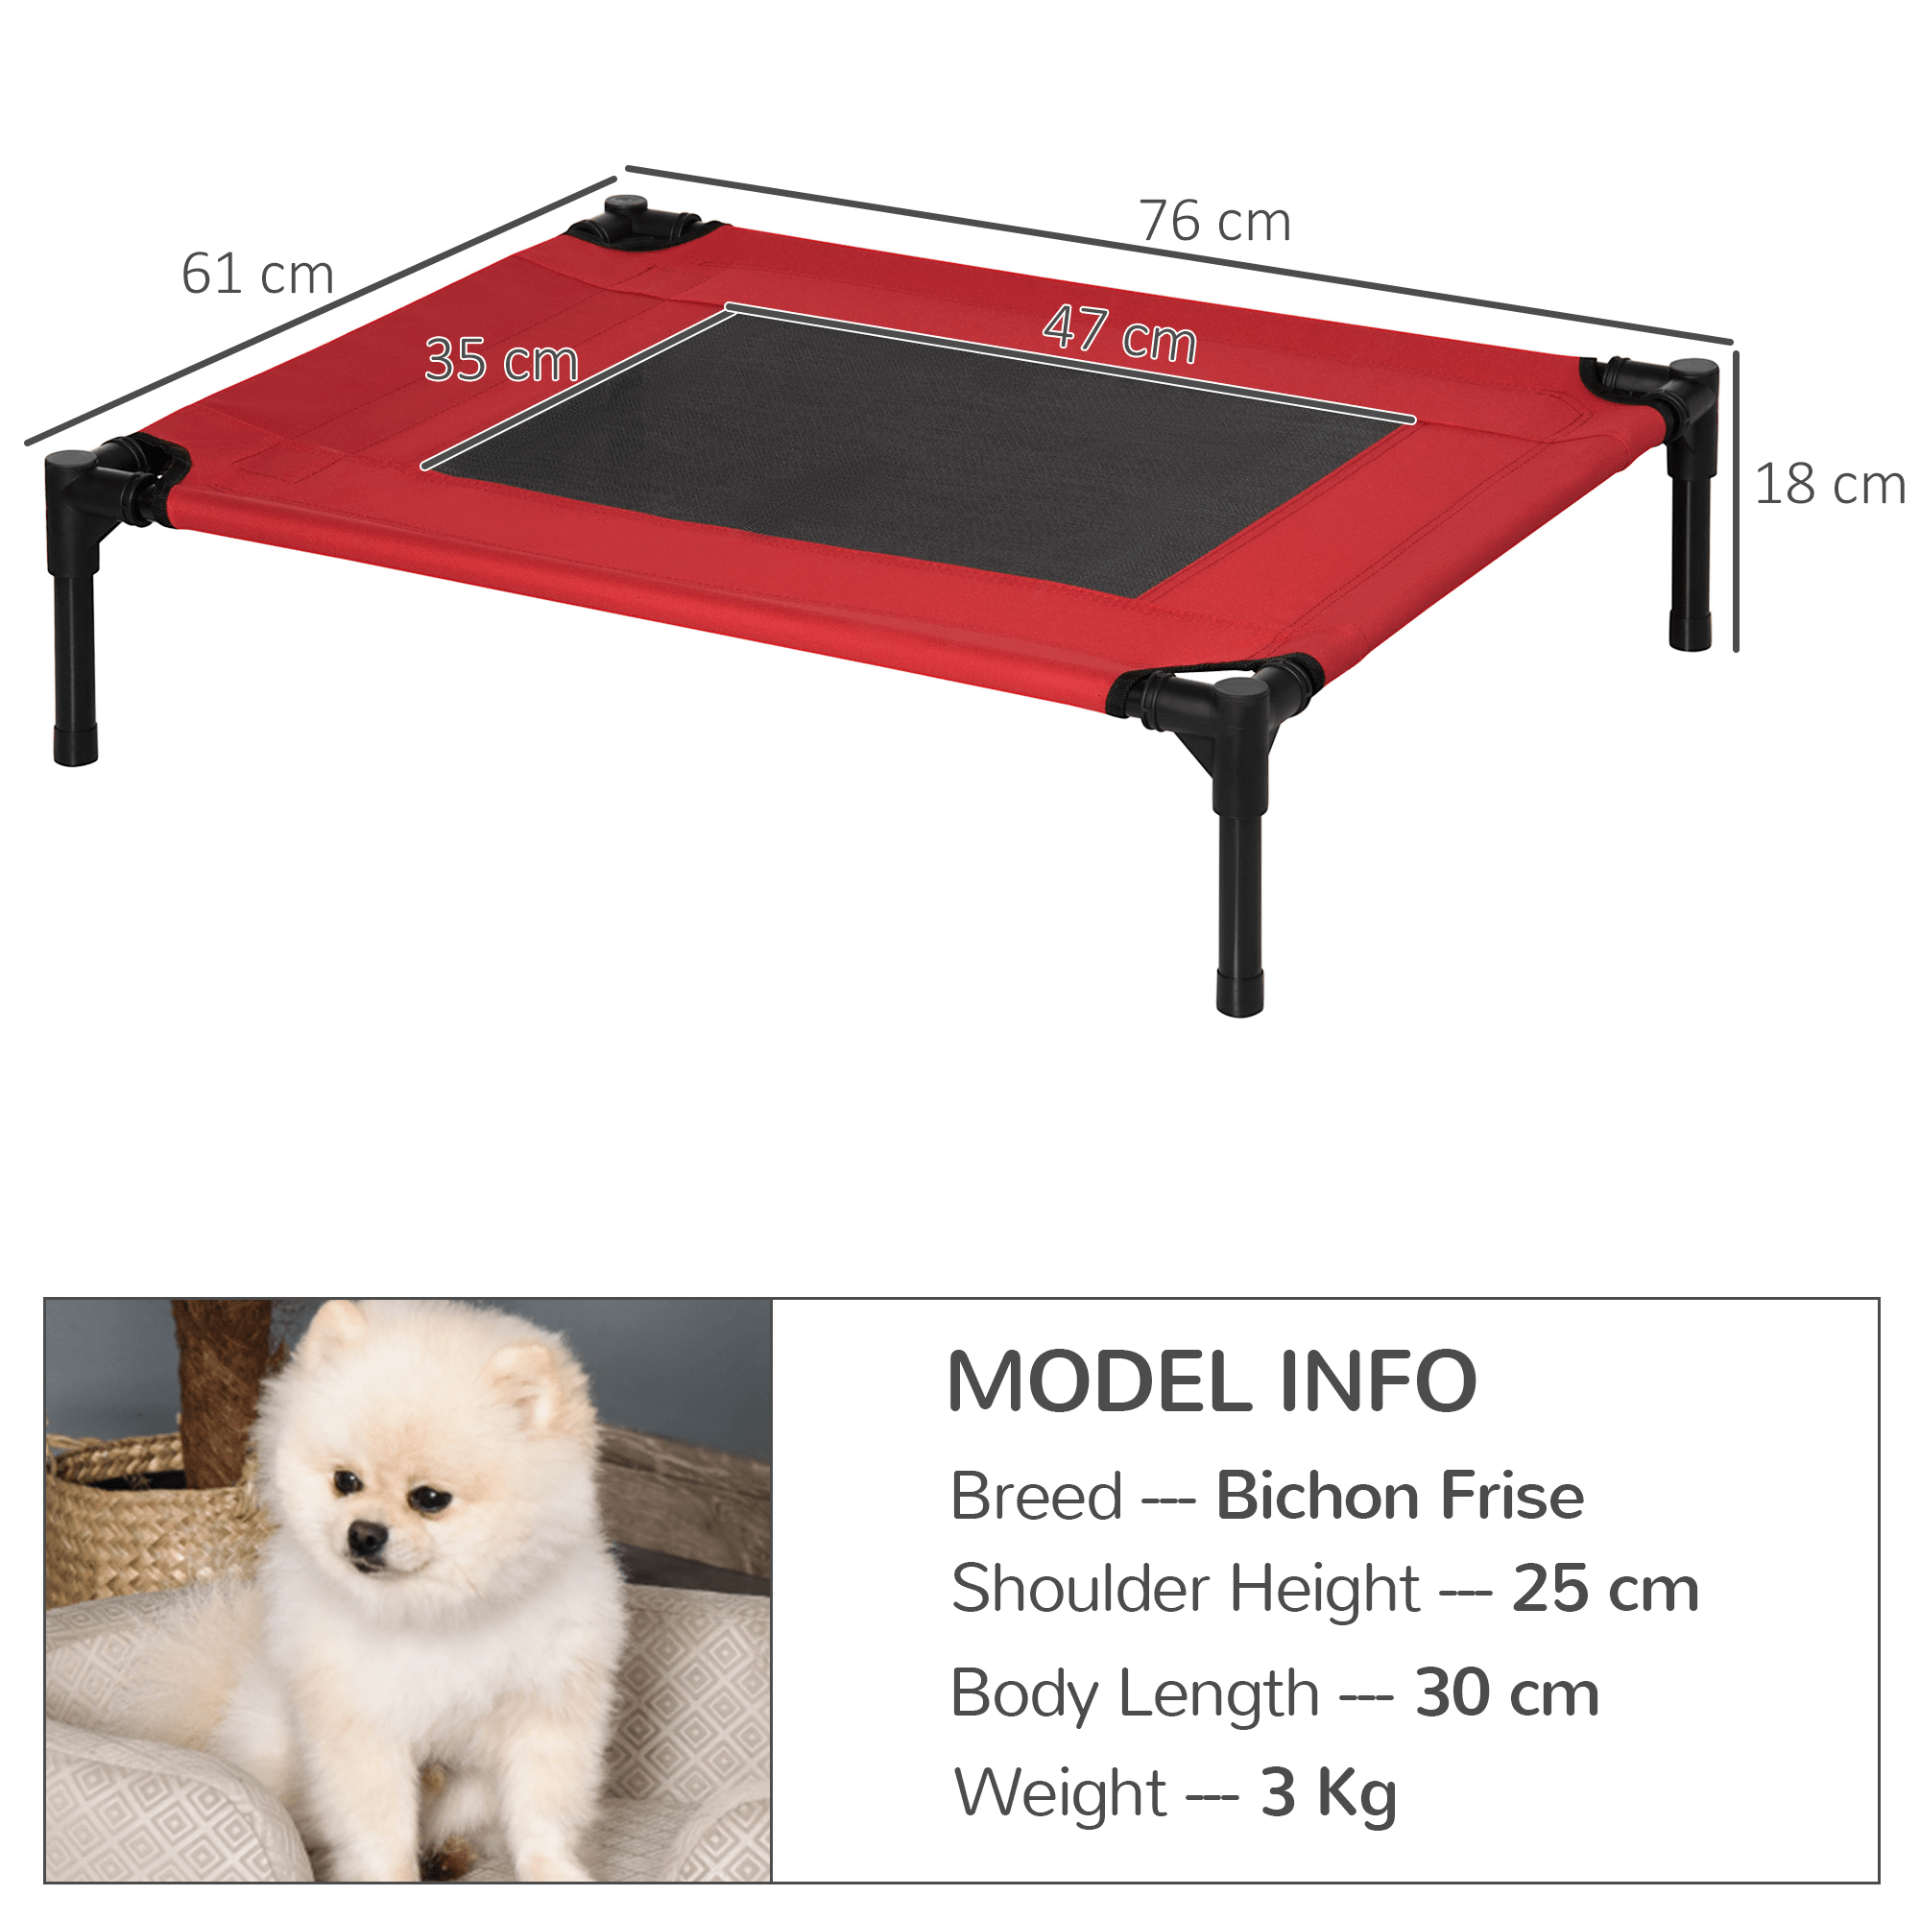 PawHut Raised Dog Bed Cat Elevated Lifted Portable Camping w/ Metal Frame Black and Red (Medium) - Comfortable and Convenient Bed for Your Pet Sleeping Mats and Airbeds Cosy Camping Co.   